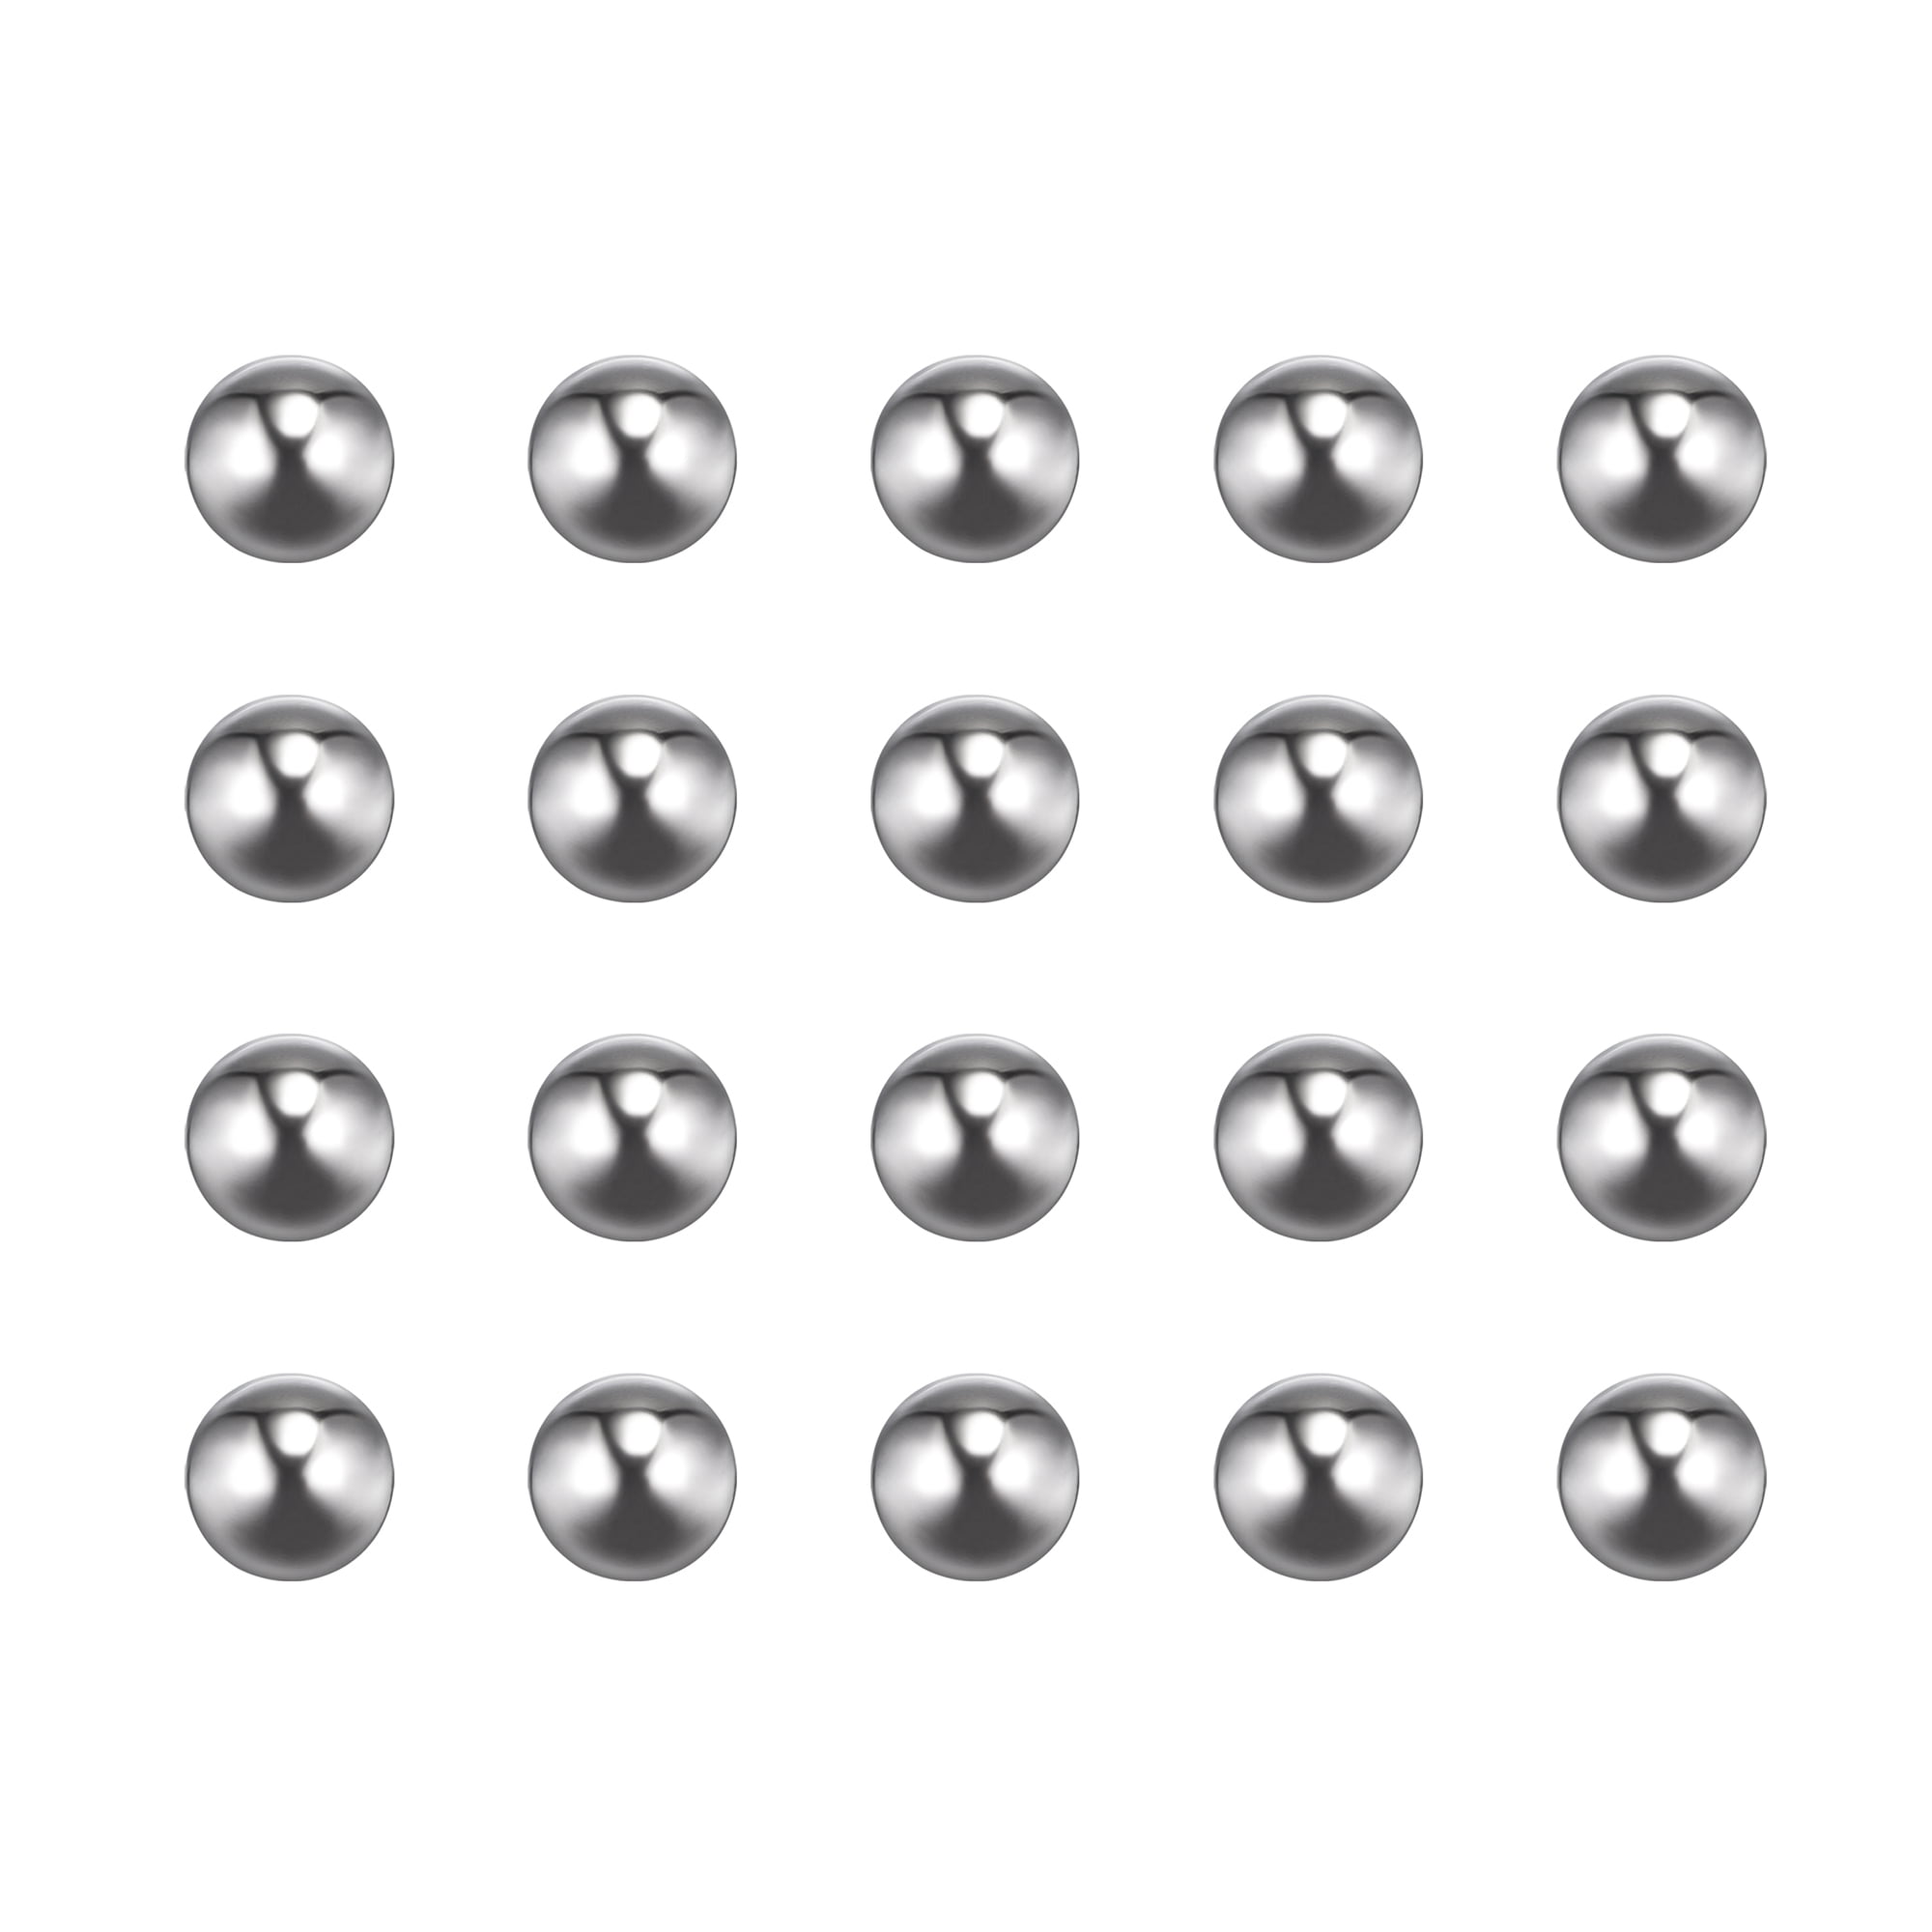 uxcell 150pcs 8mm 201 Stainless Steel Bearing Balls G200 Precision 